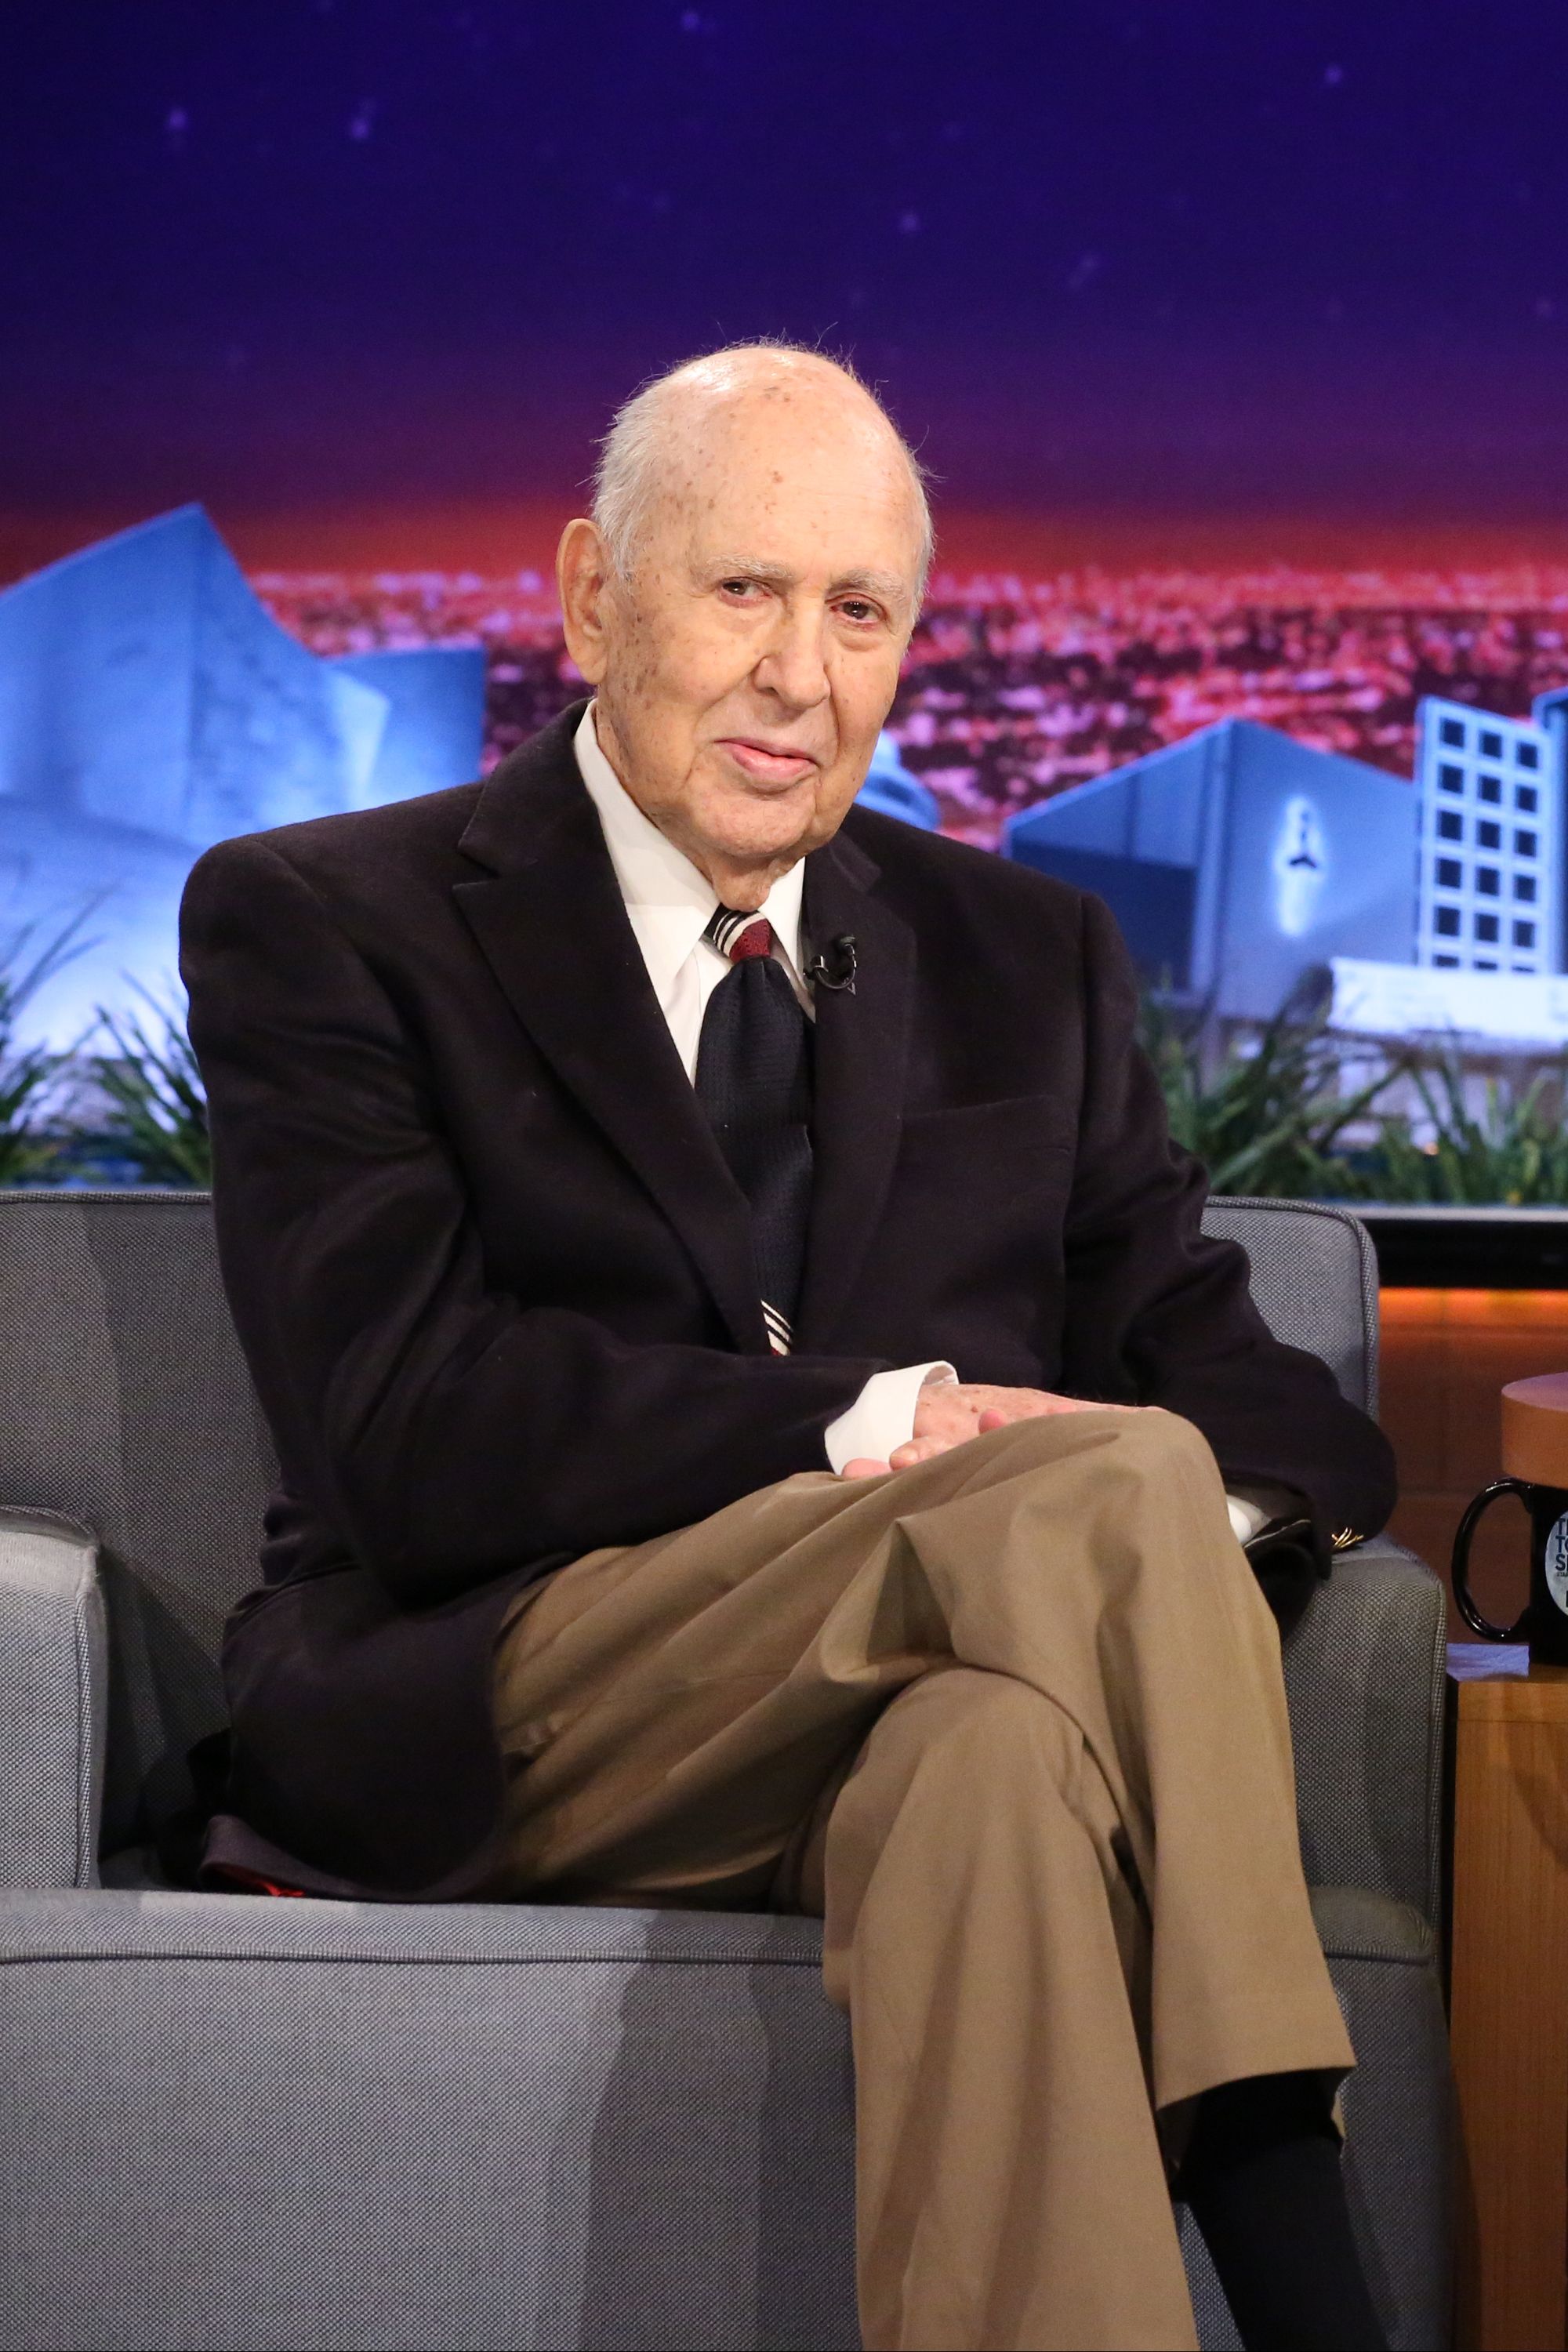 Late Comedian Carl Reiner during THE TONIGHT SHOW episode 0204 on February 4, 2015. | Photo: Getty Images